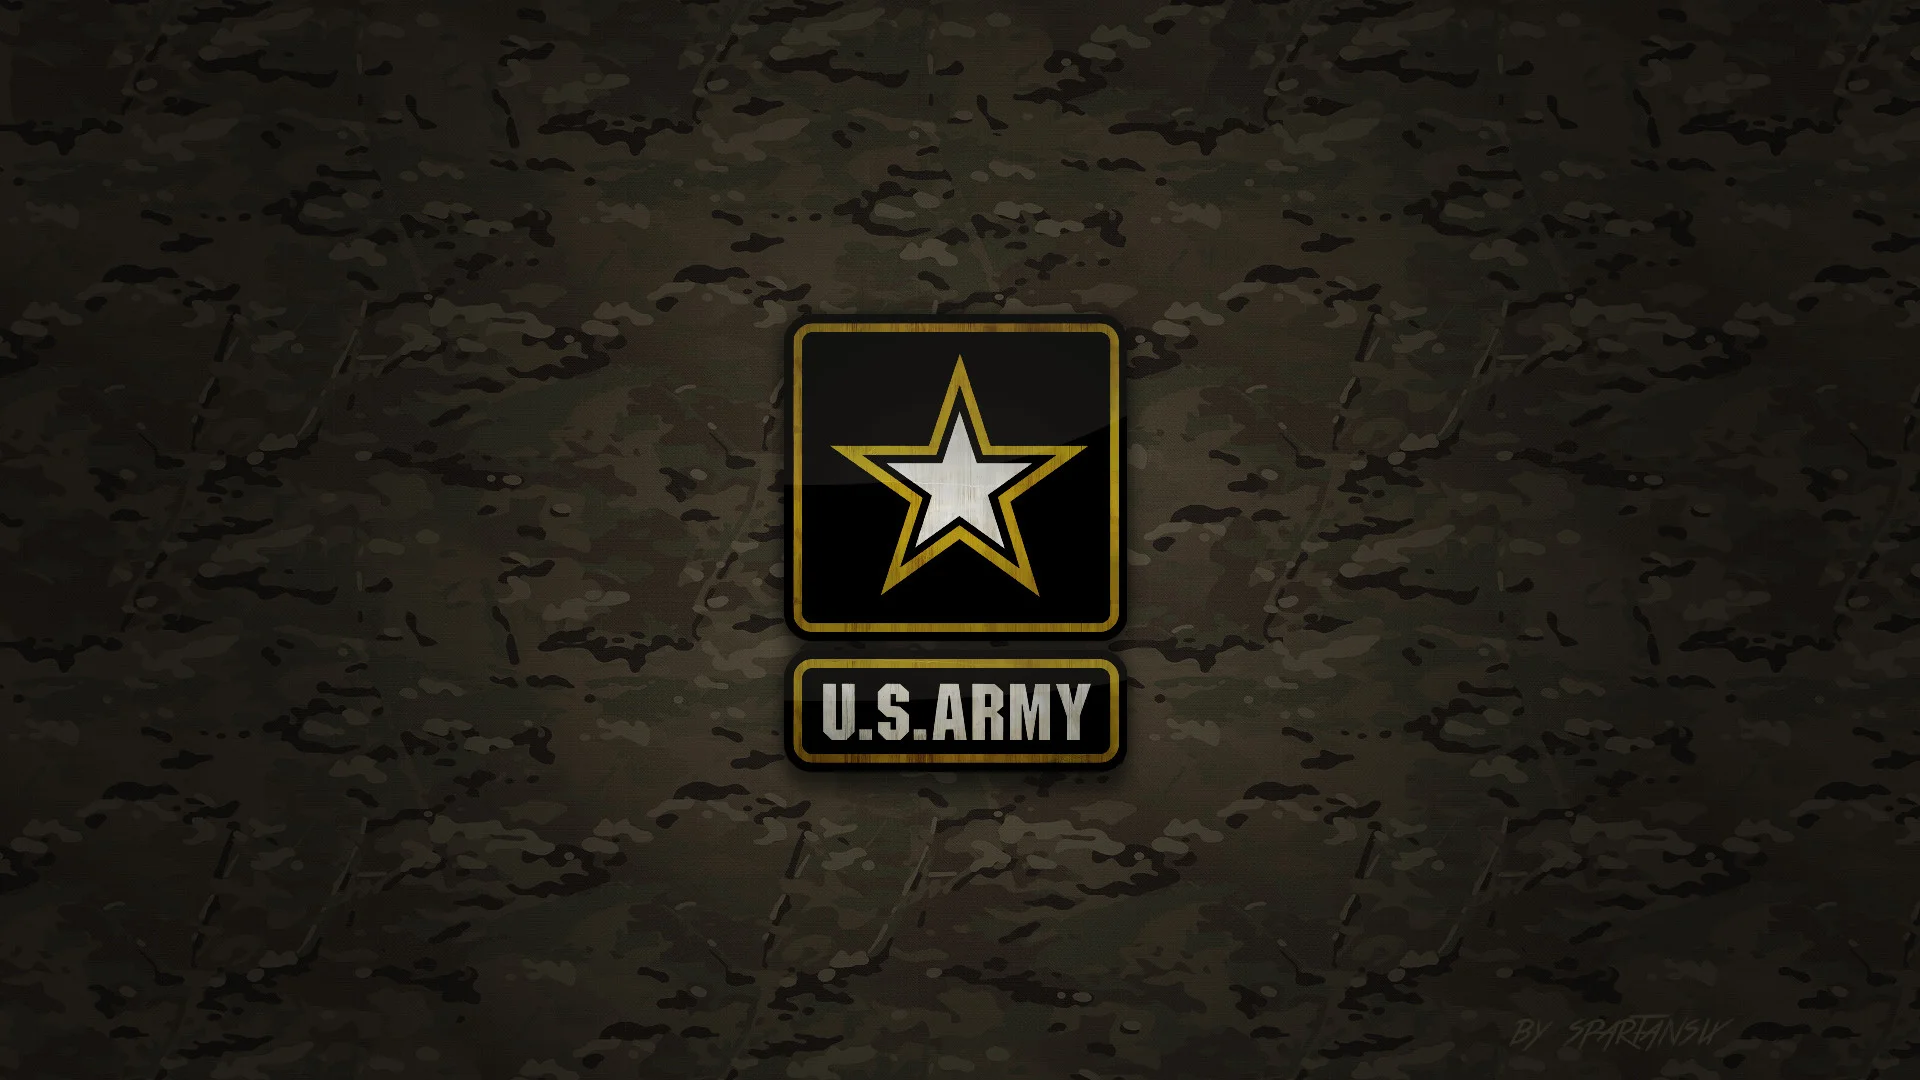 Awesome army full screen HDwallpaper Pinterest Army and Hd desktop